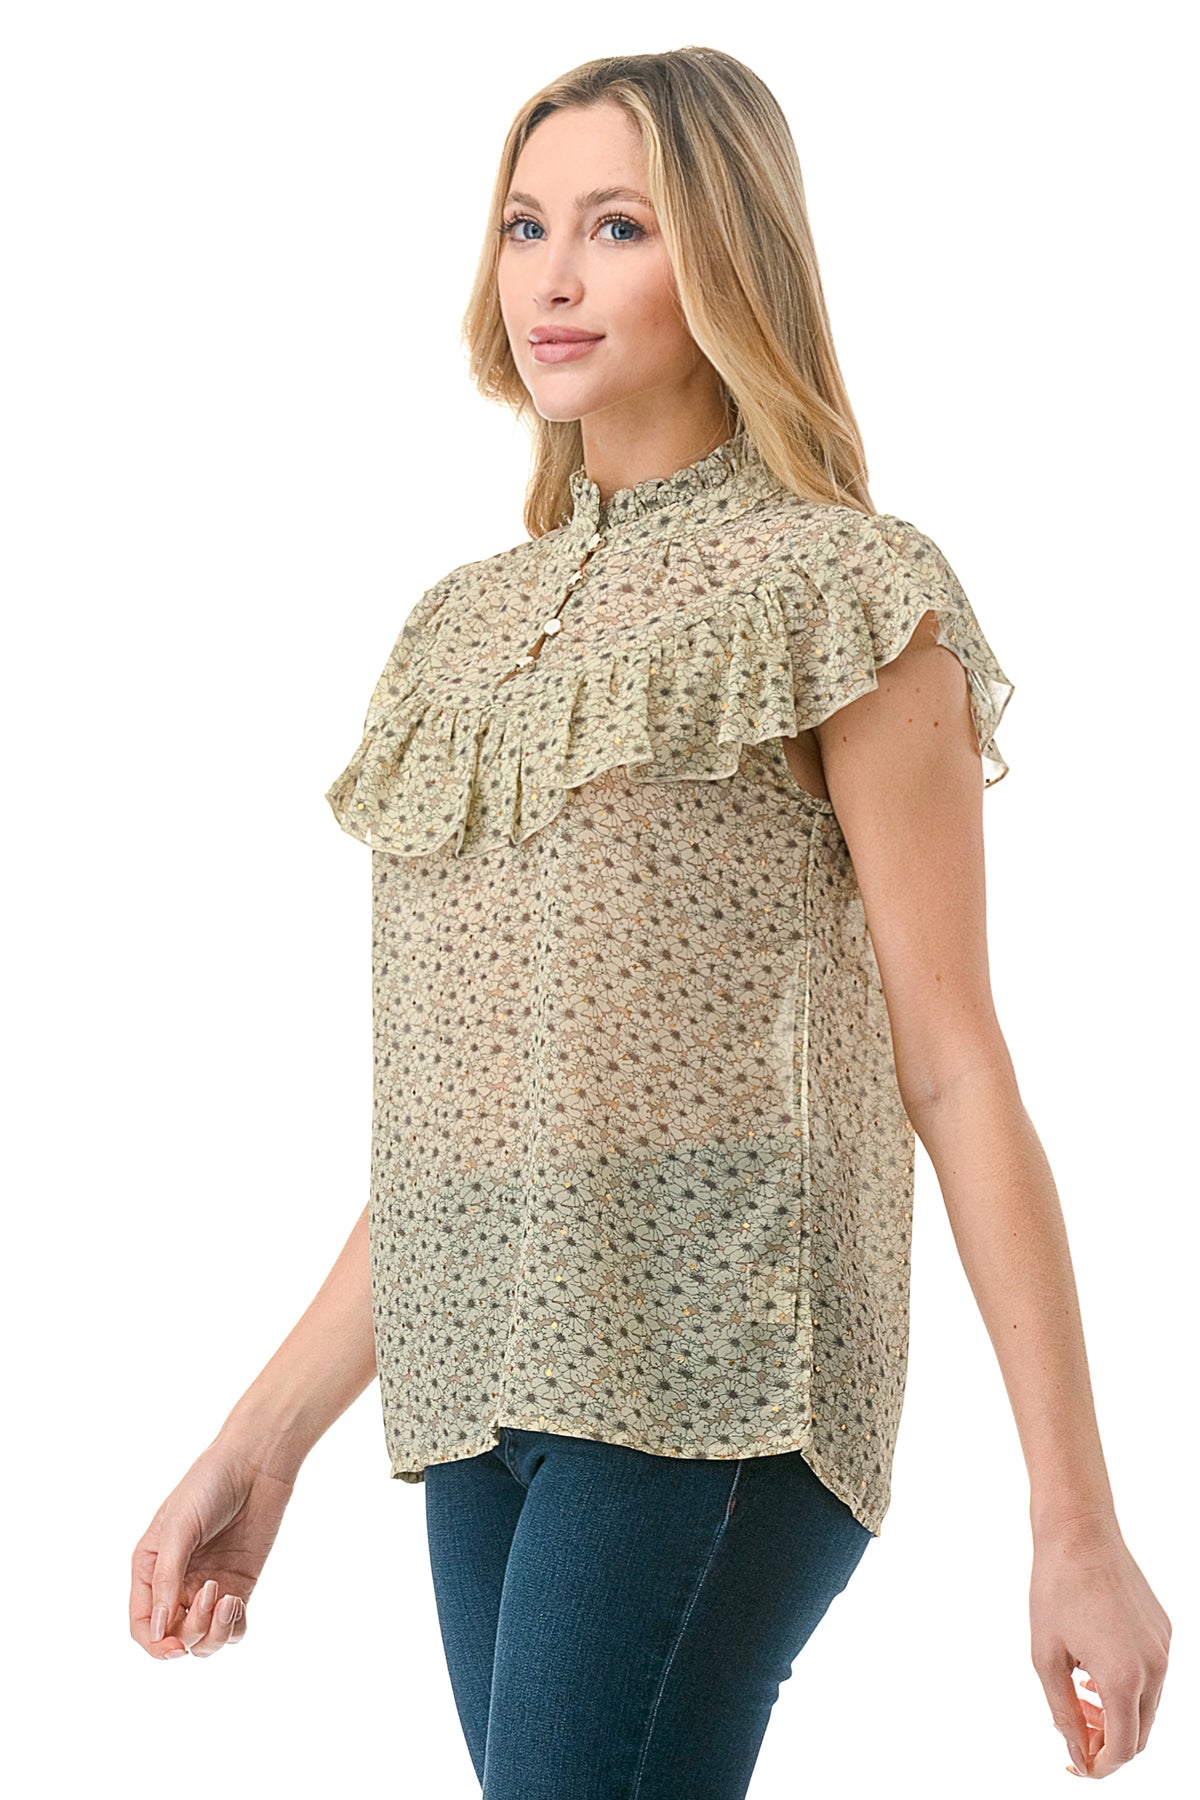 Olive Shine Floral Chiffon Printed Flutter Sleeveless Top